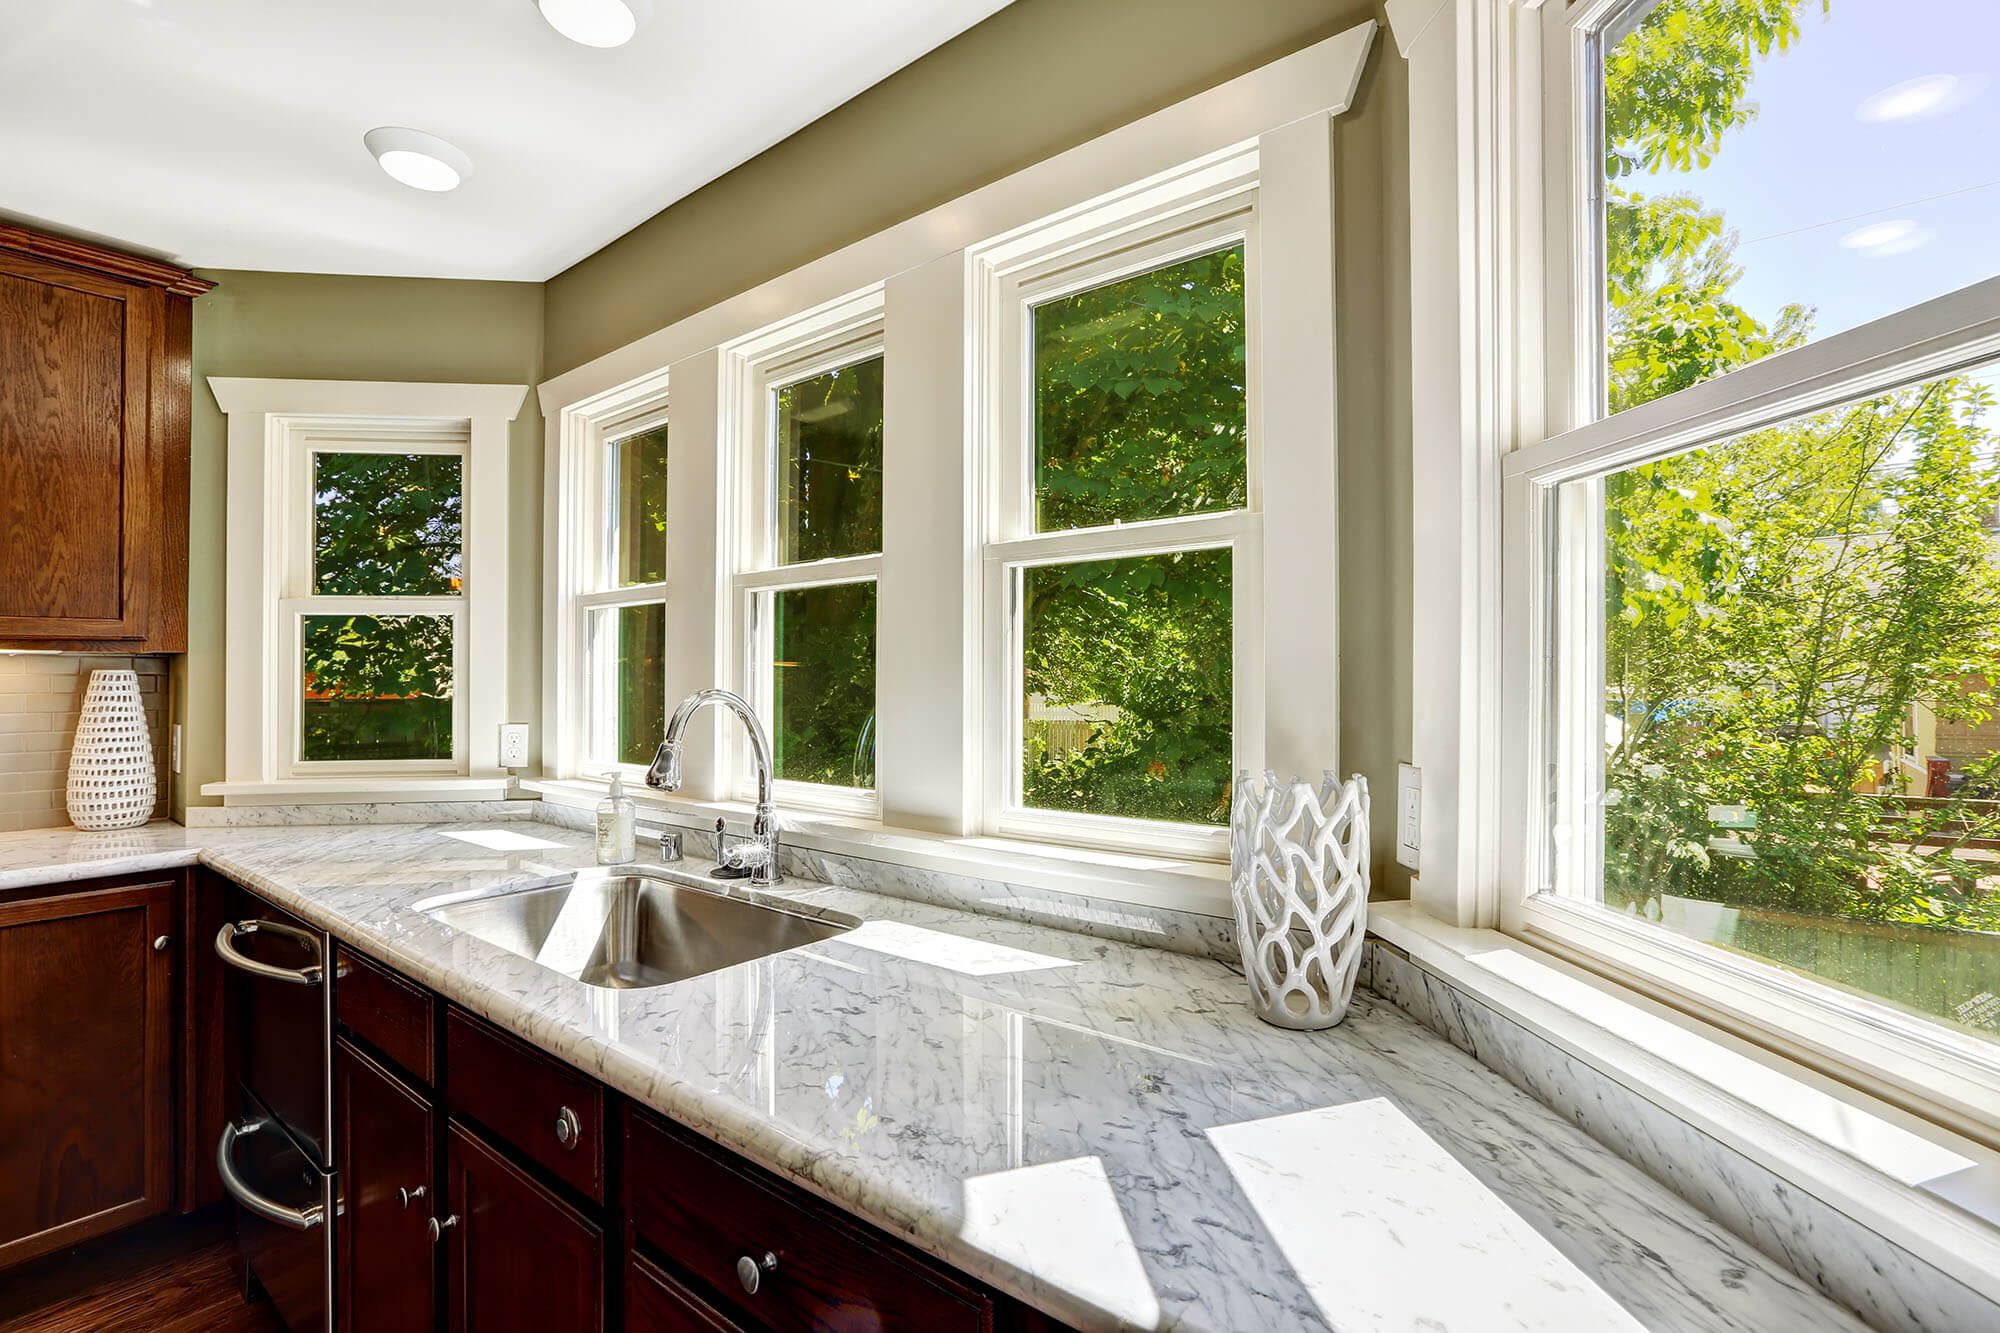 Double hung windows in a kitchen